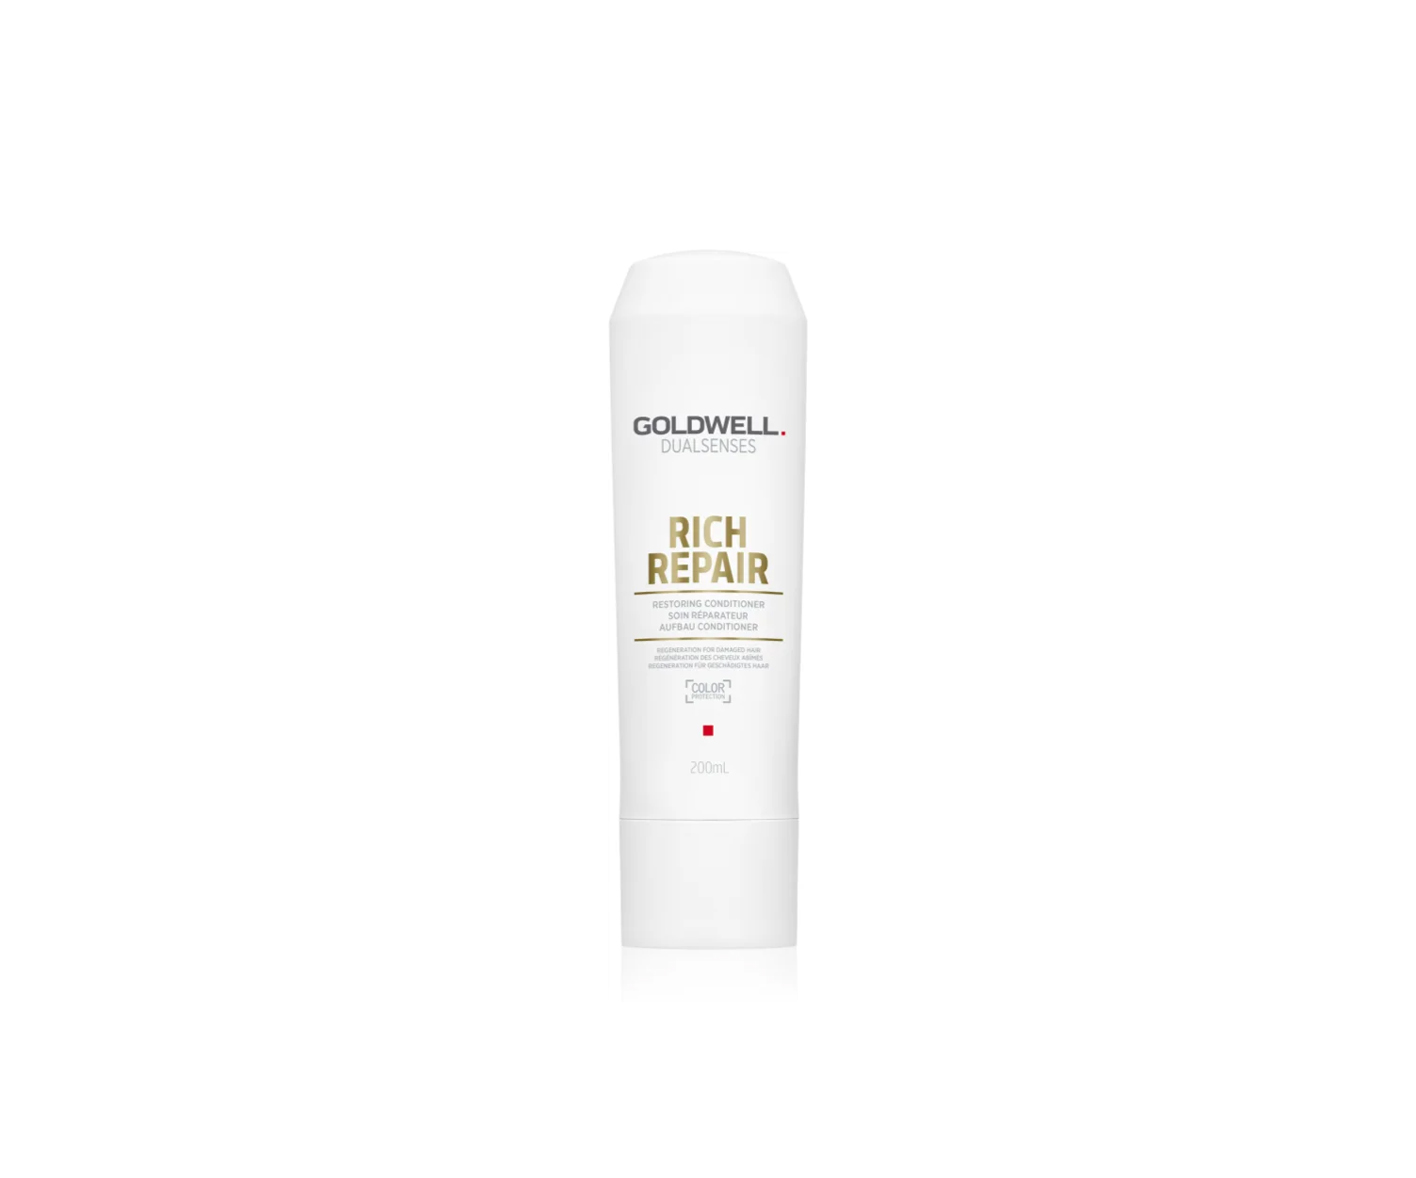 Goldwell, Dualsenses Rich Repair, protein conditioner for hair